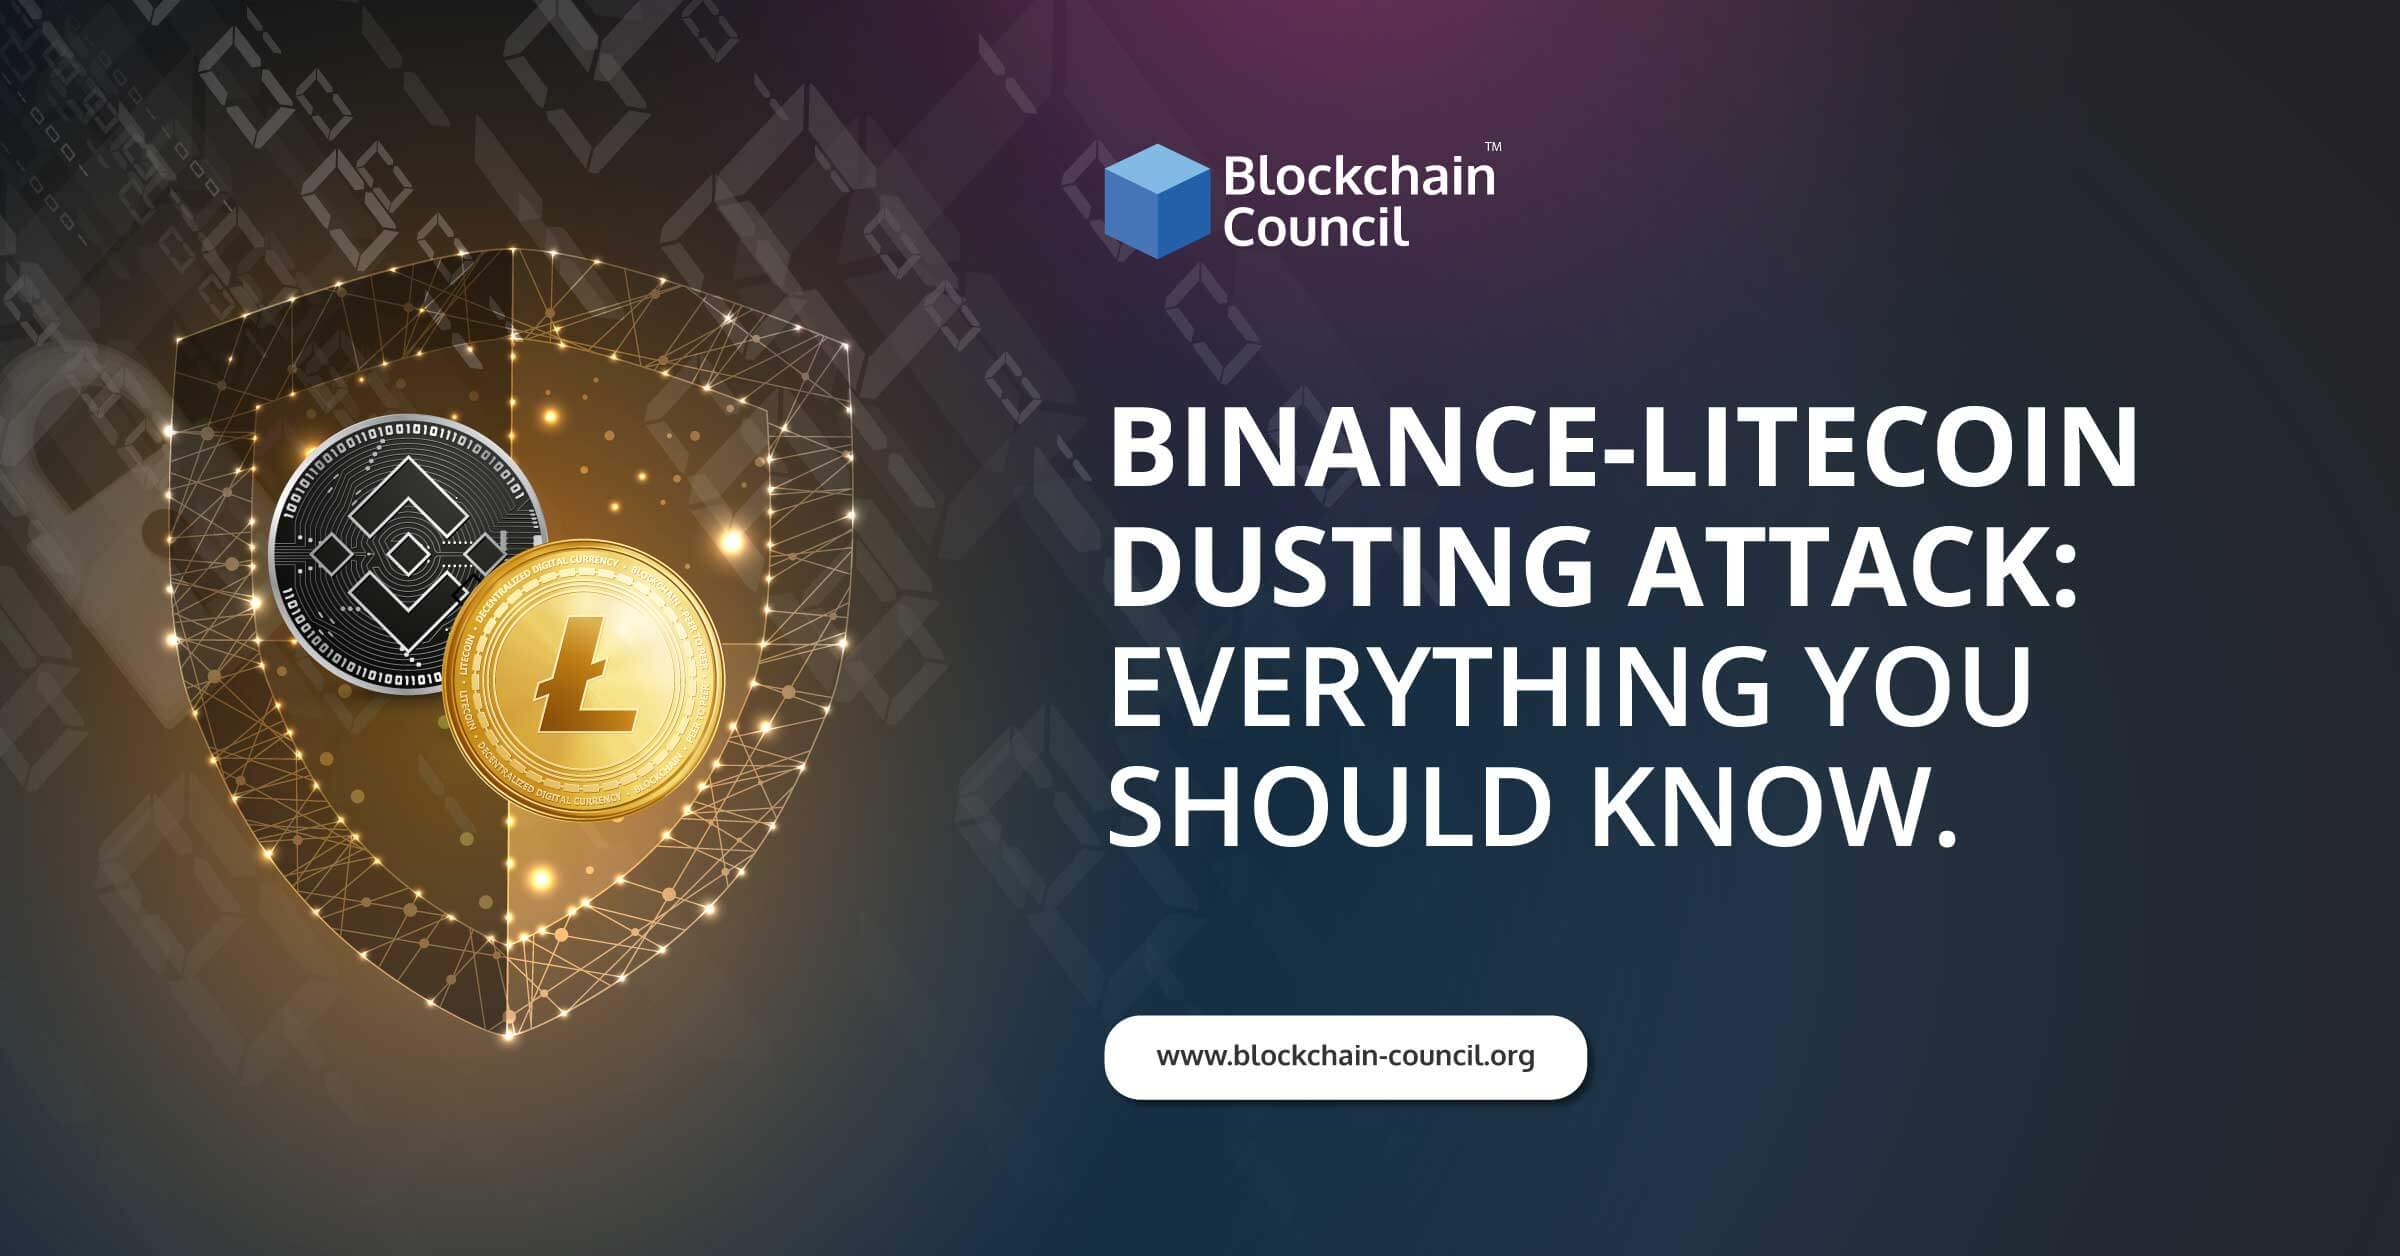 Binance-Litecoin Dusting Attack: Everything You Should Know